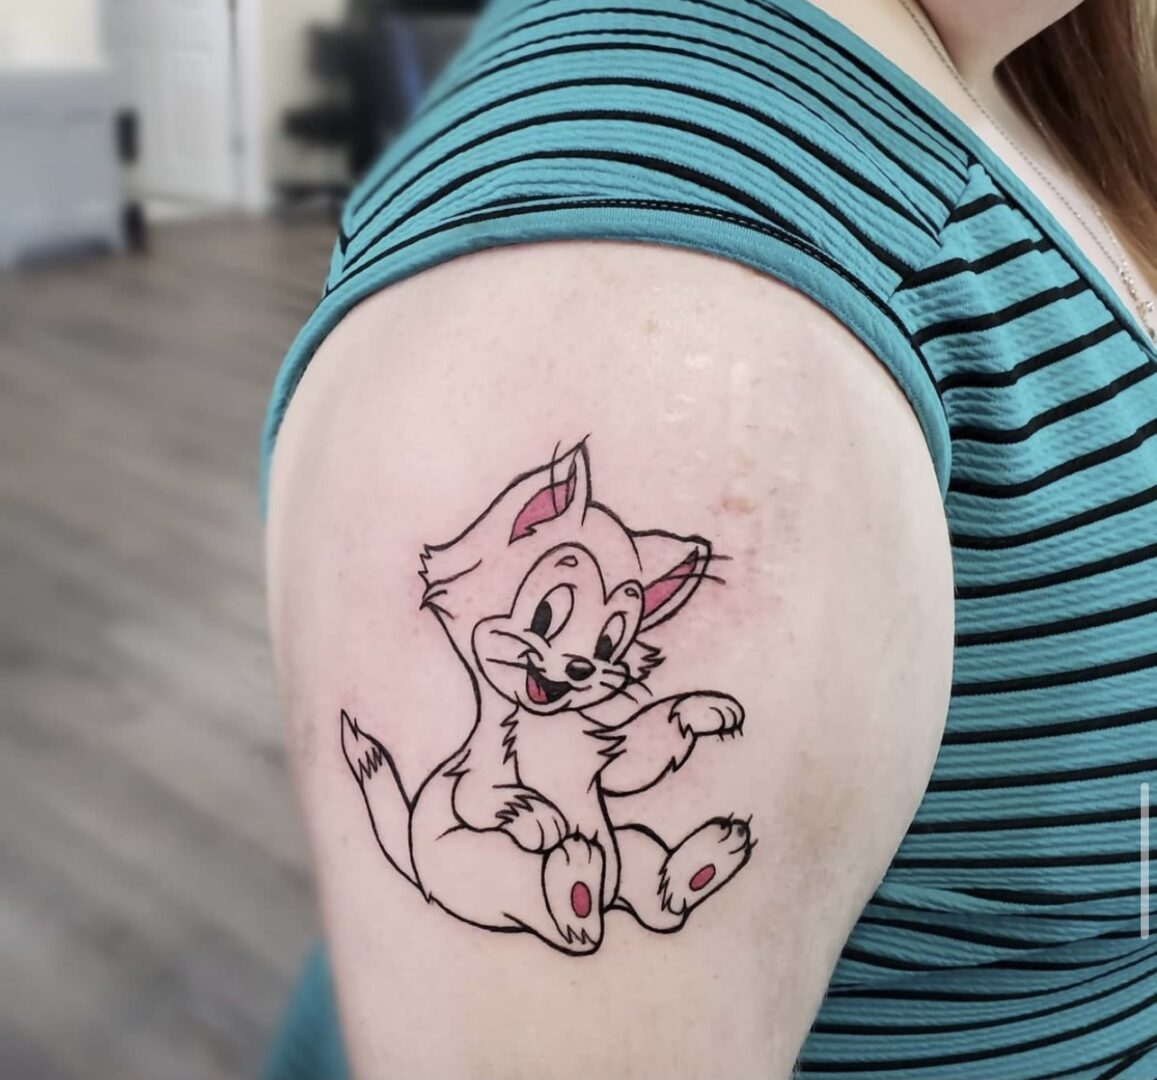 A woman with a tattoo of a dog on her arm.